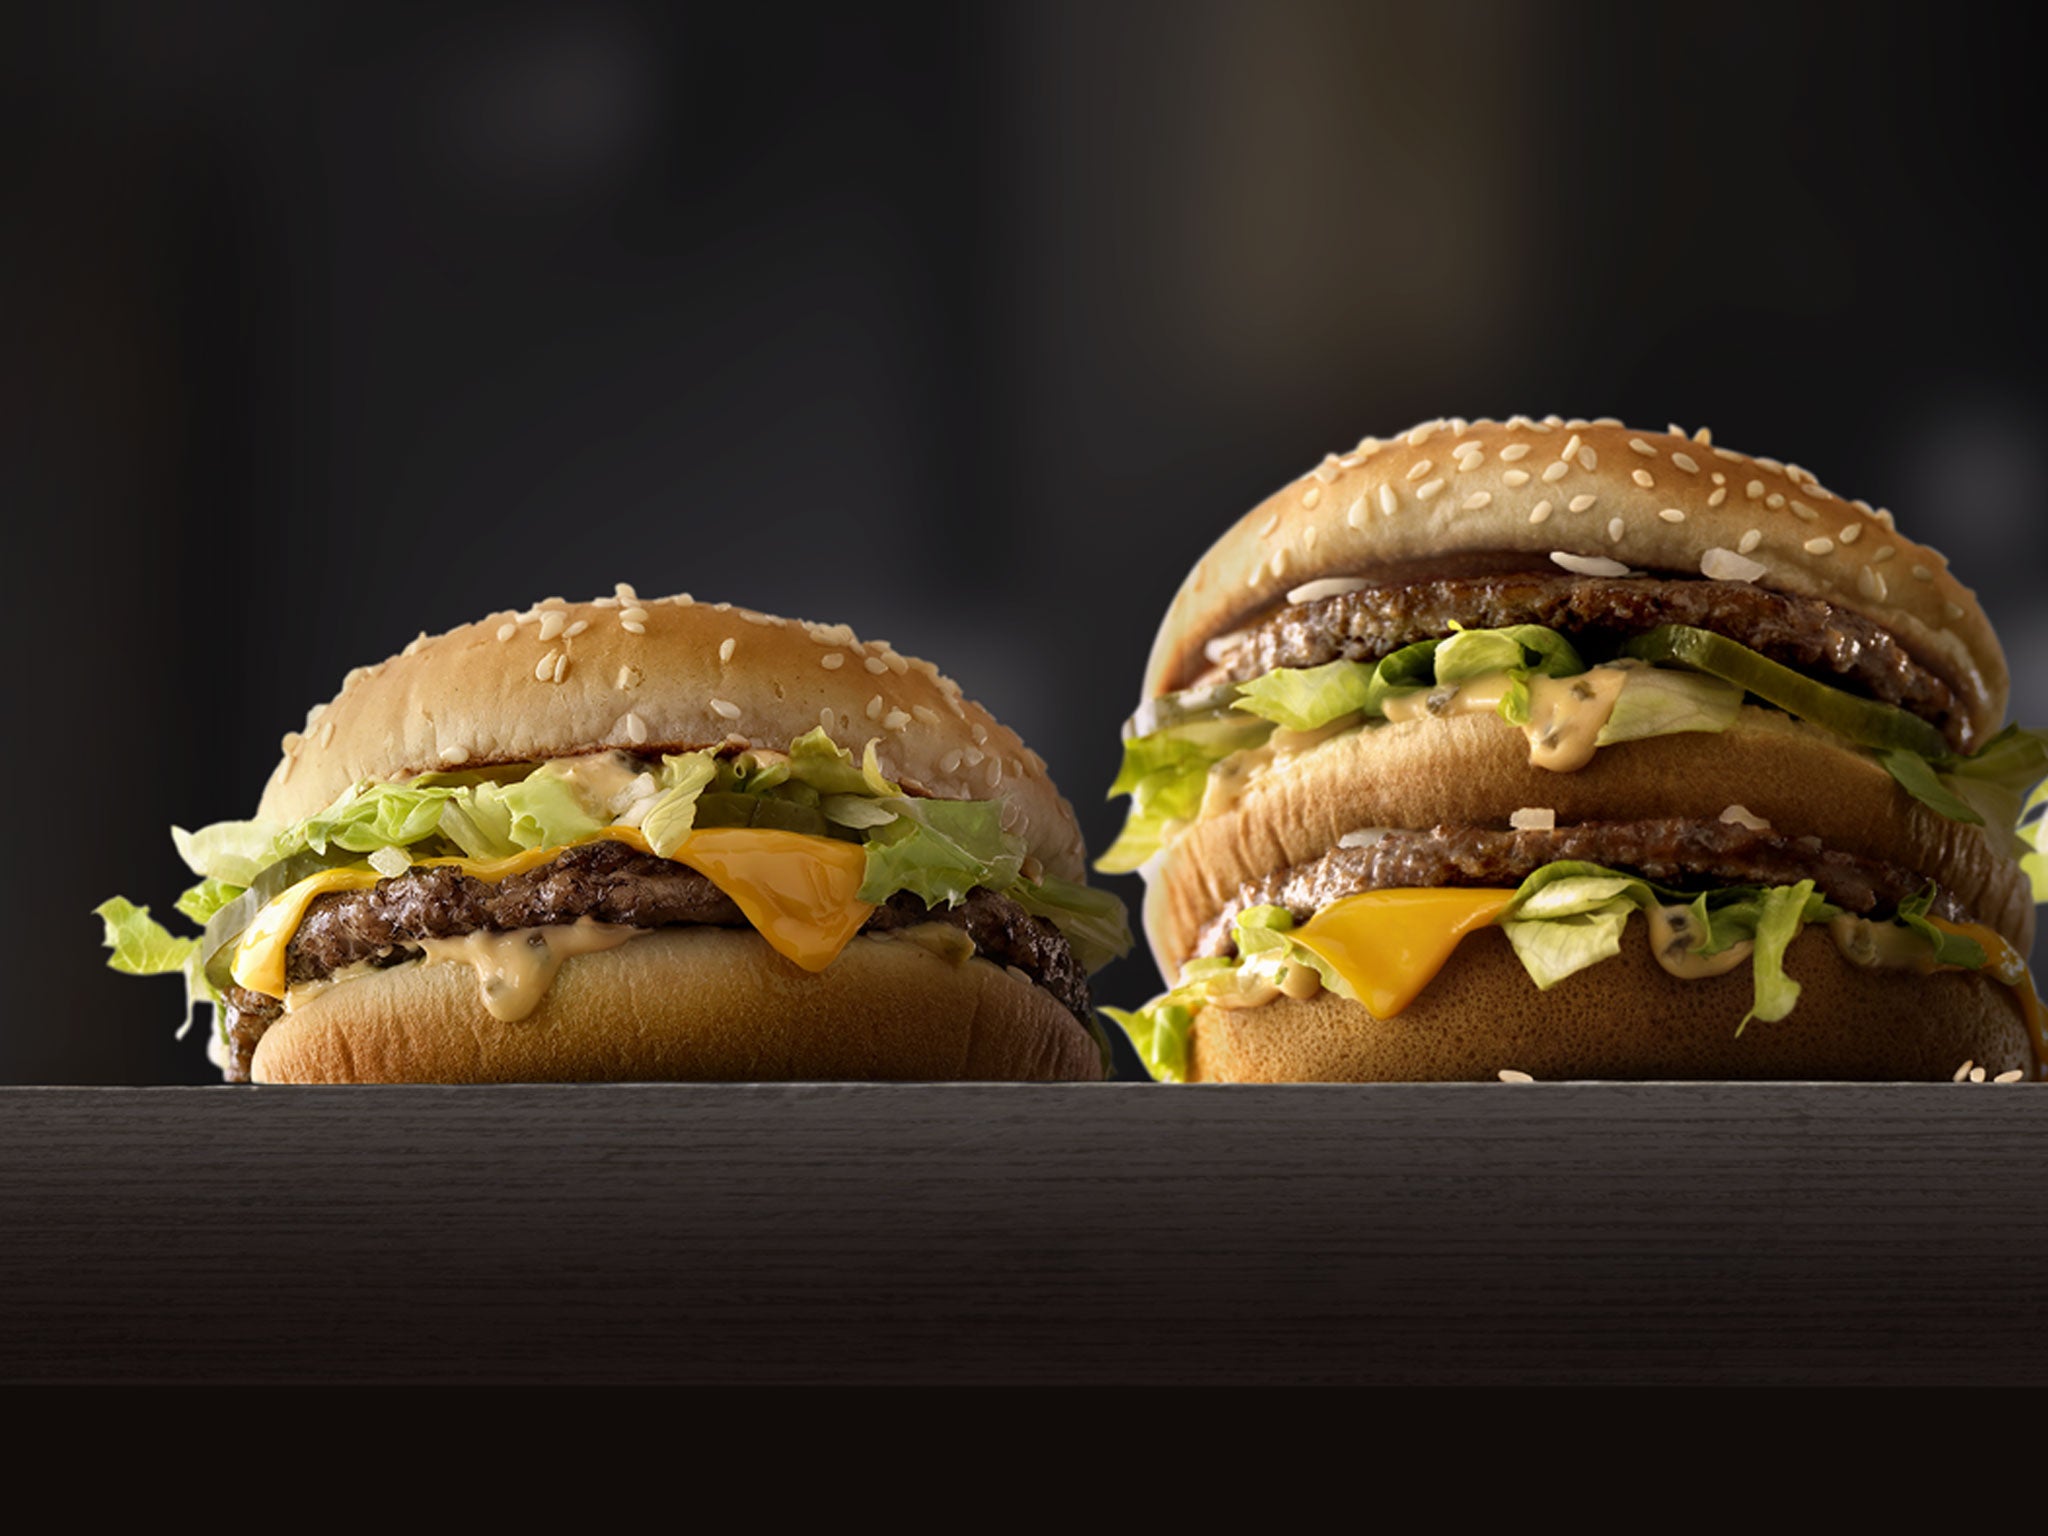 Chef Chad Schafer said the Grand Mac and Mac Jr. are in homage to the original Big Mac